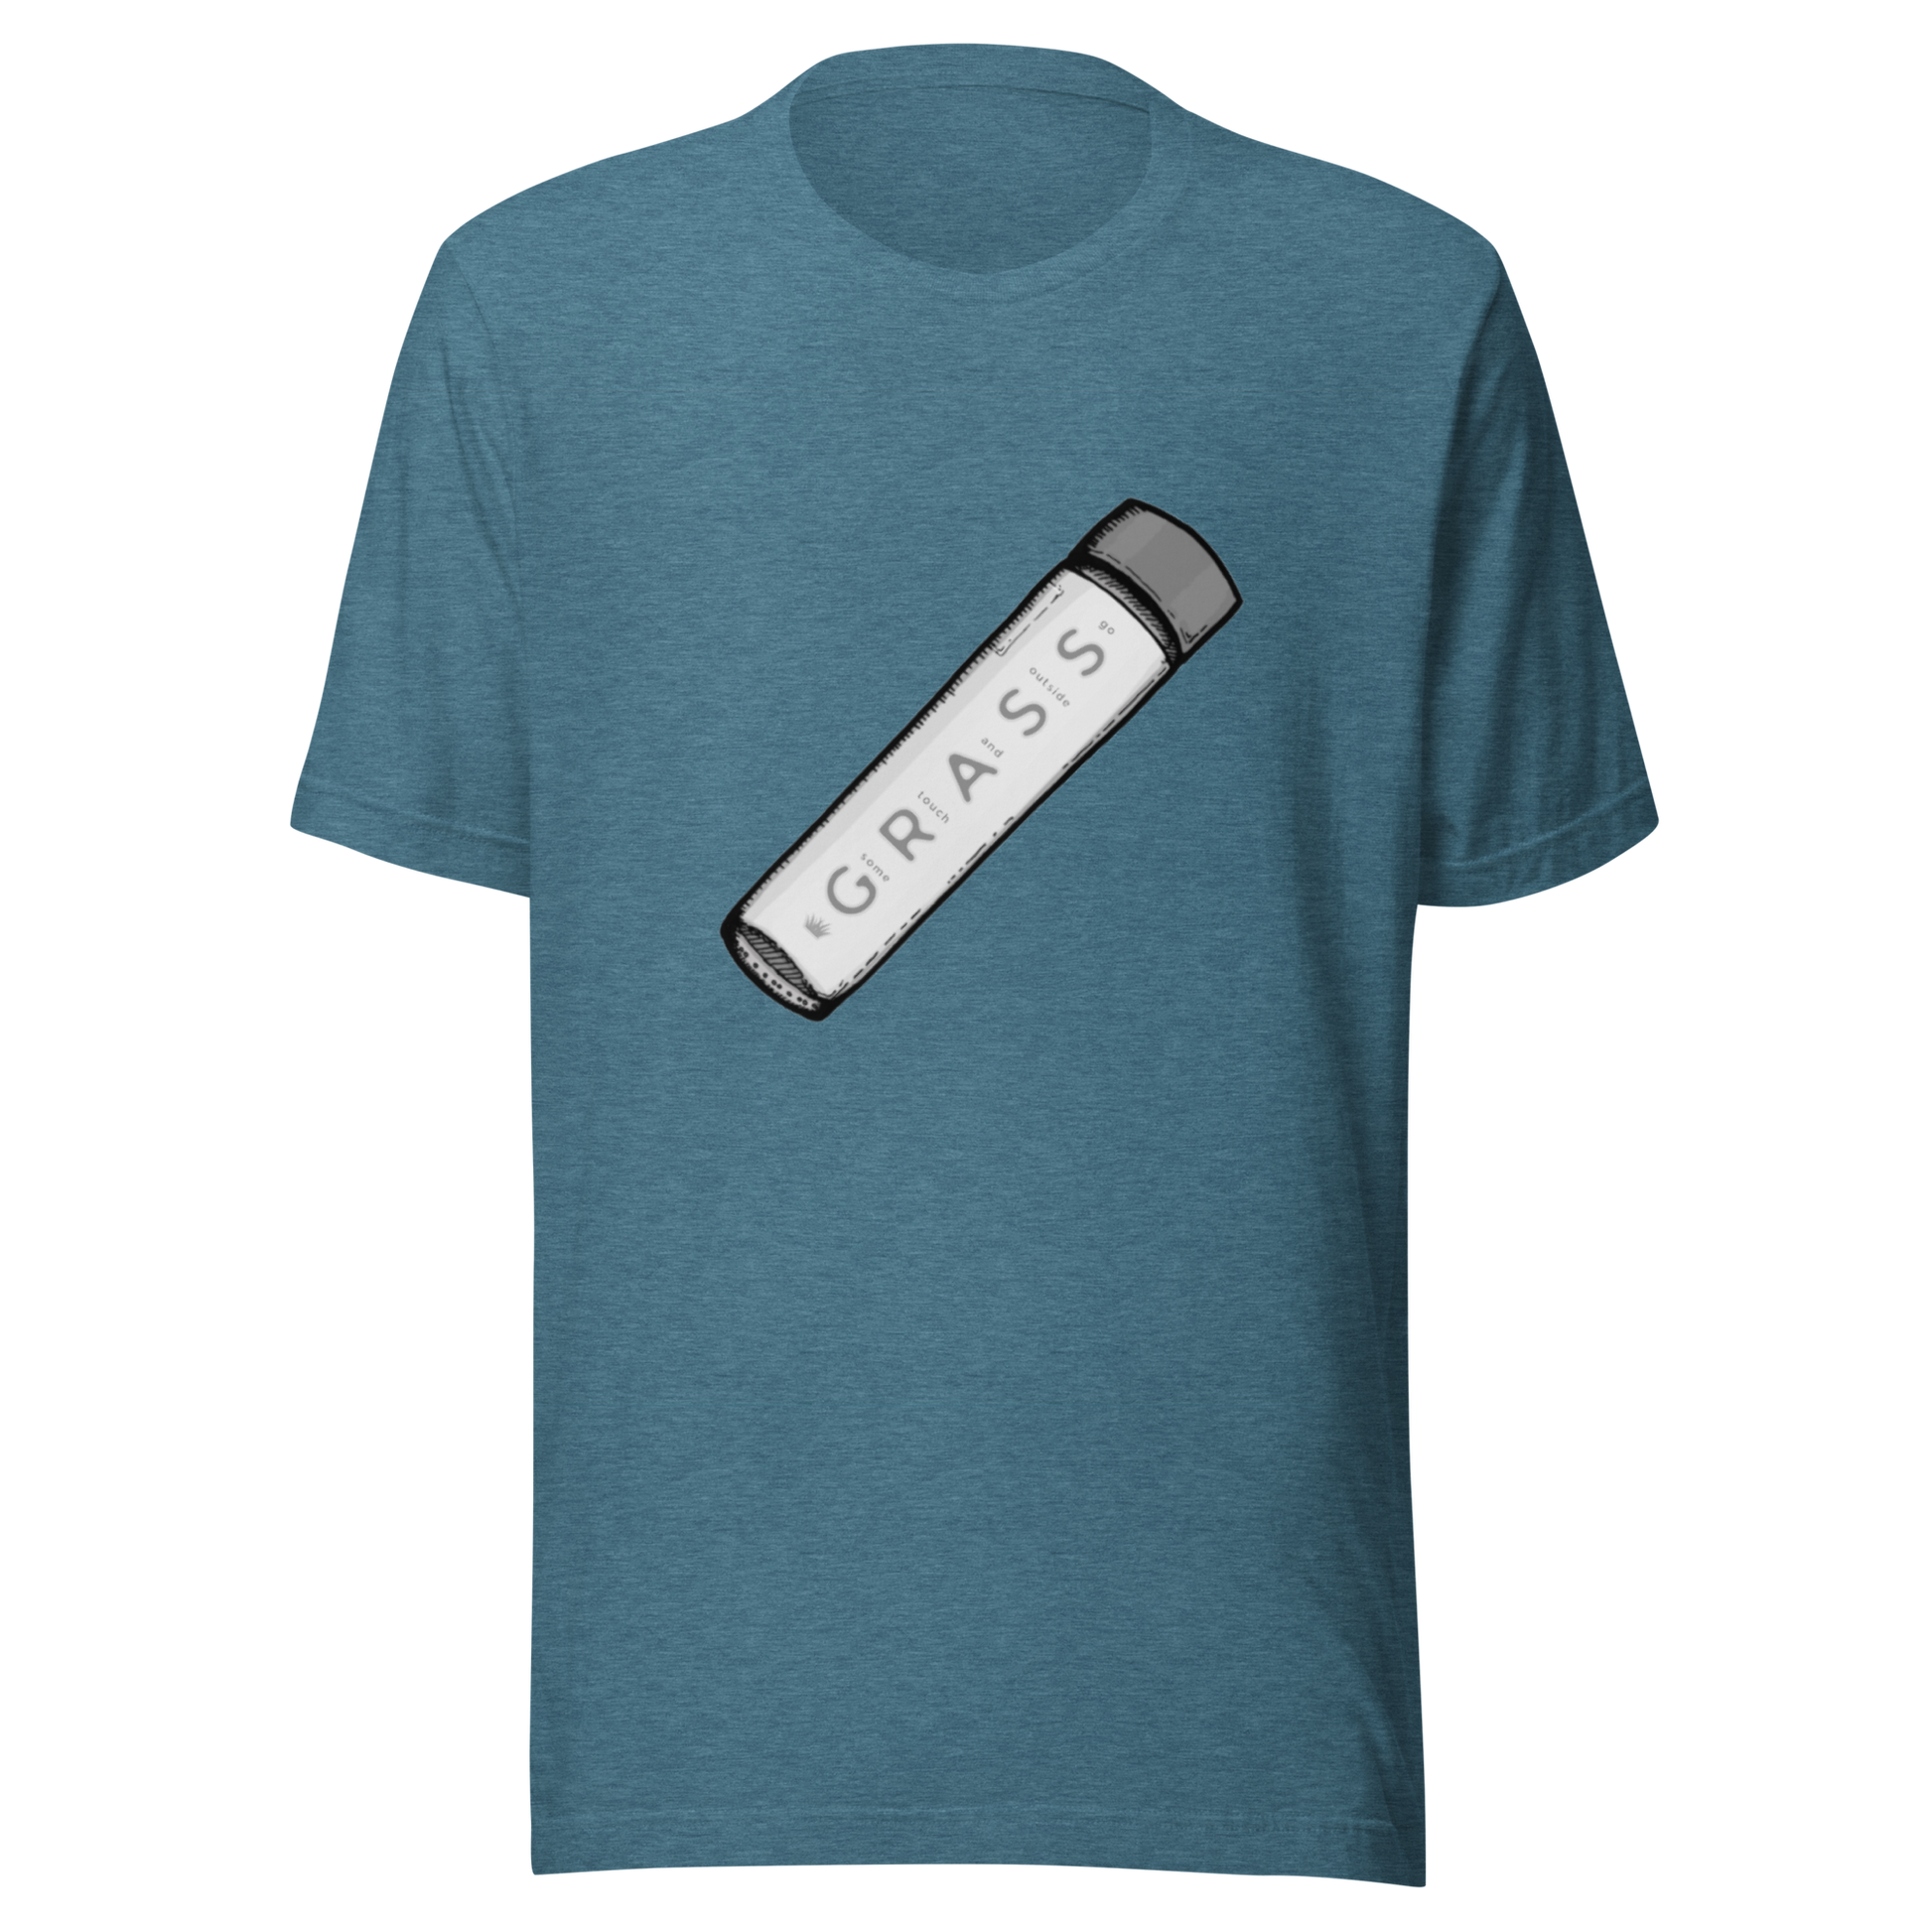 touch some grass t-shirt in teal - gaslit apparel